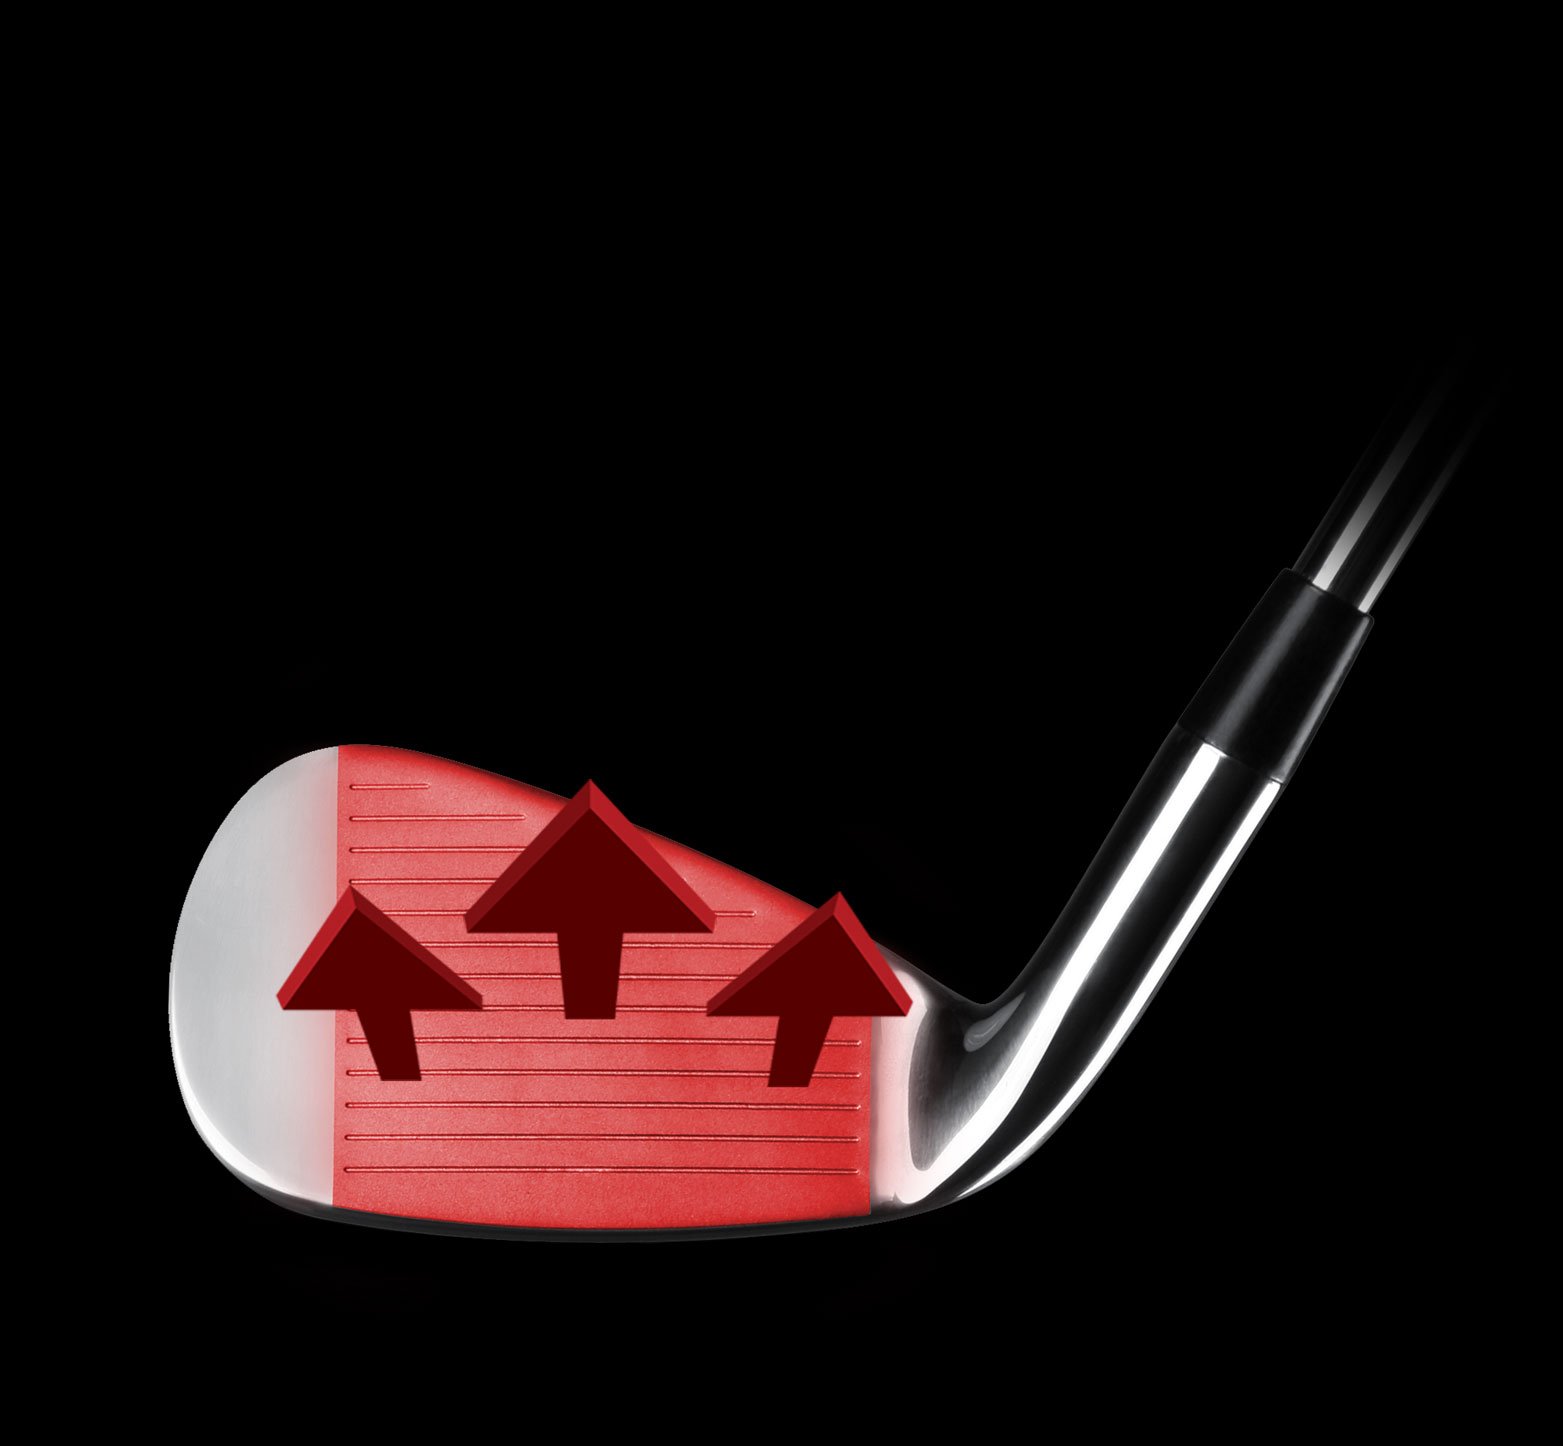 Juggernaut Max cavity back iron with glowing red face and arrows pointing away from the face